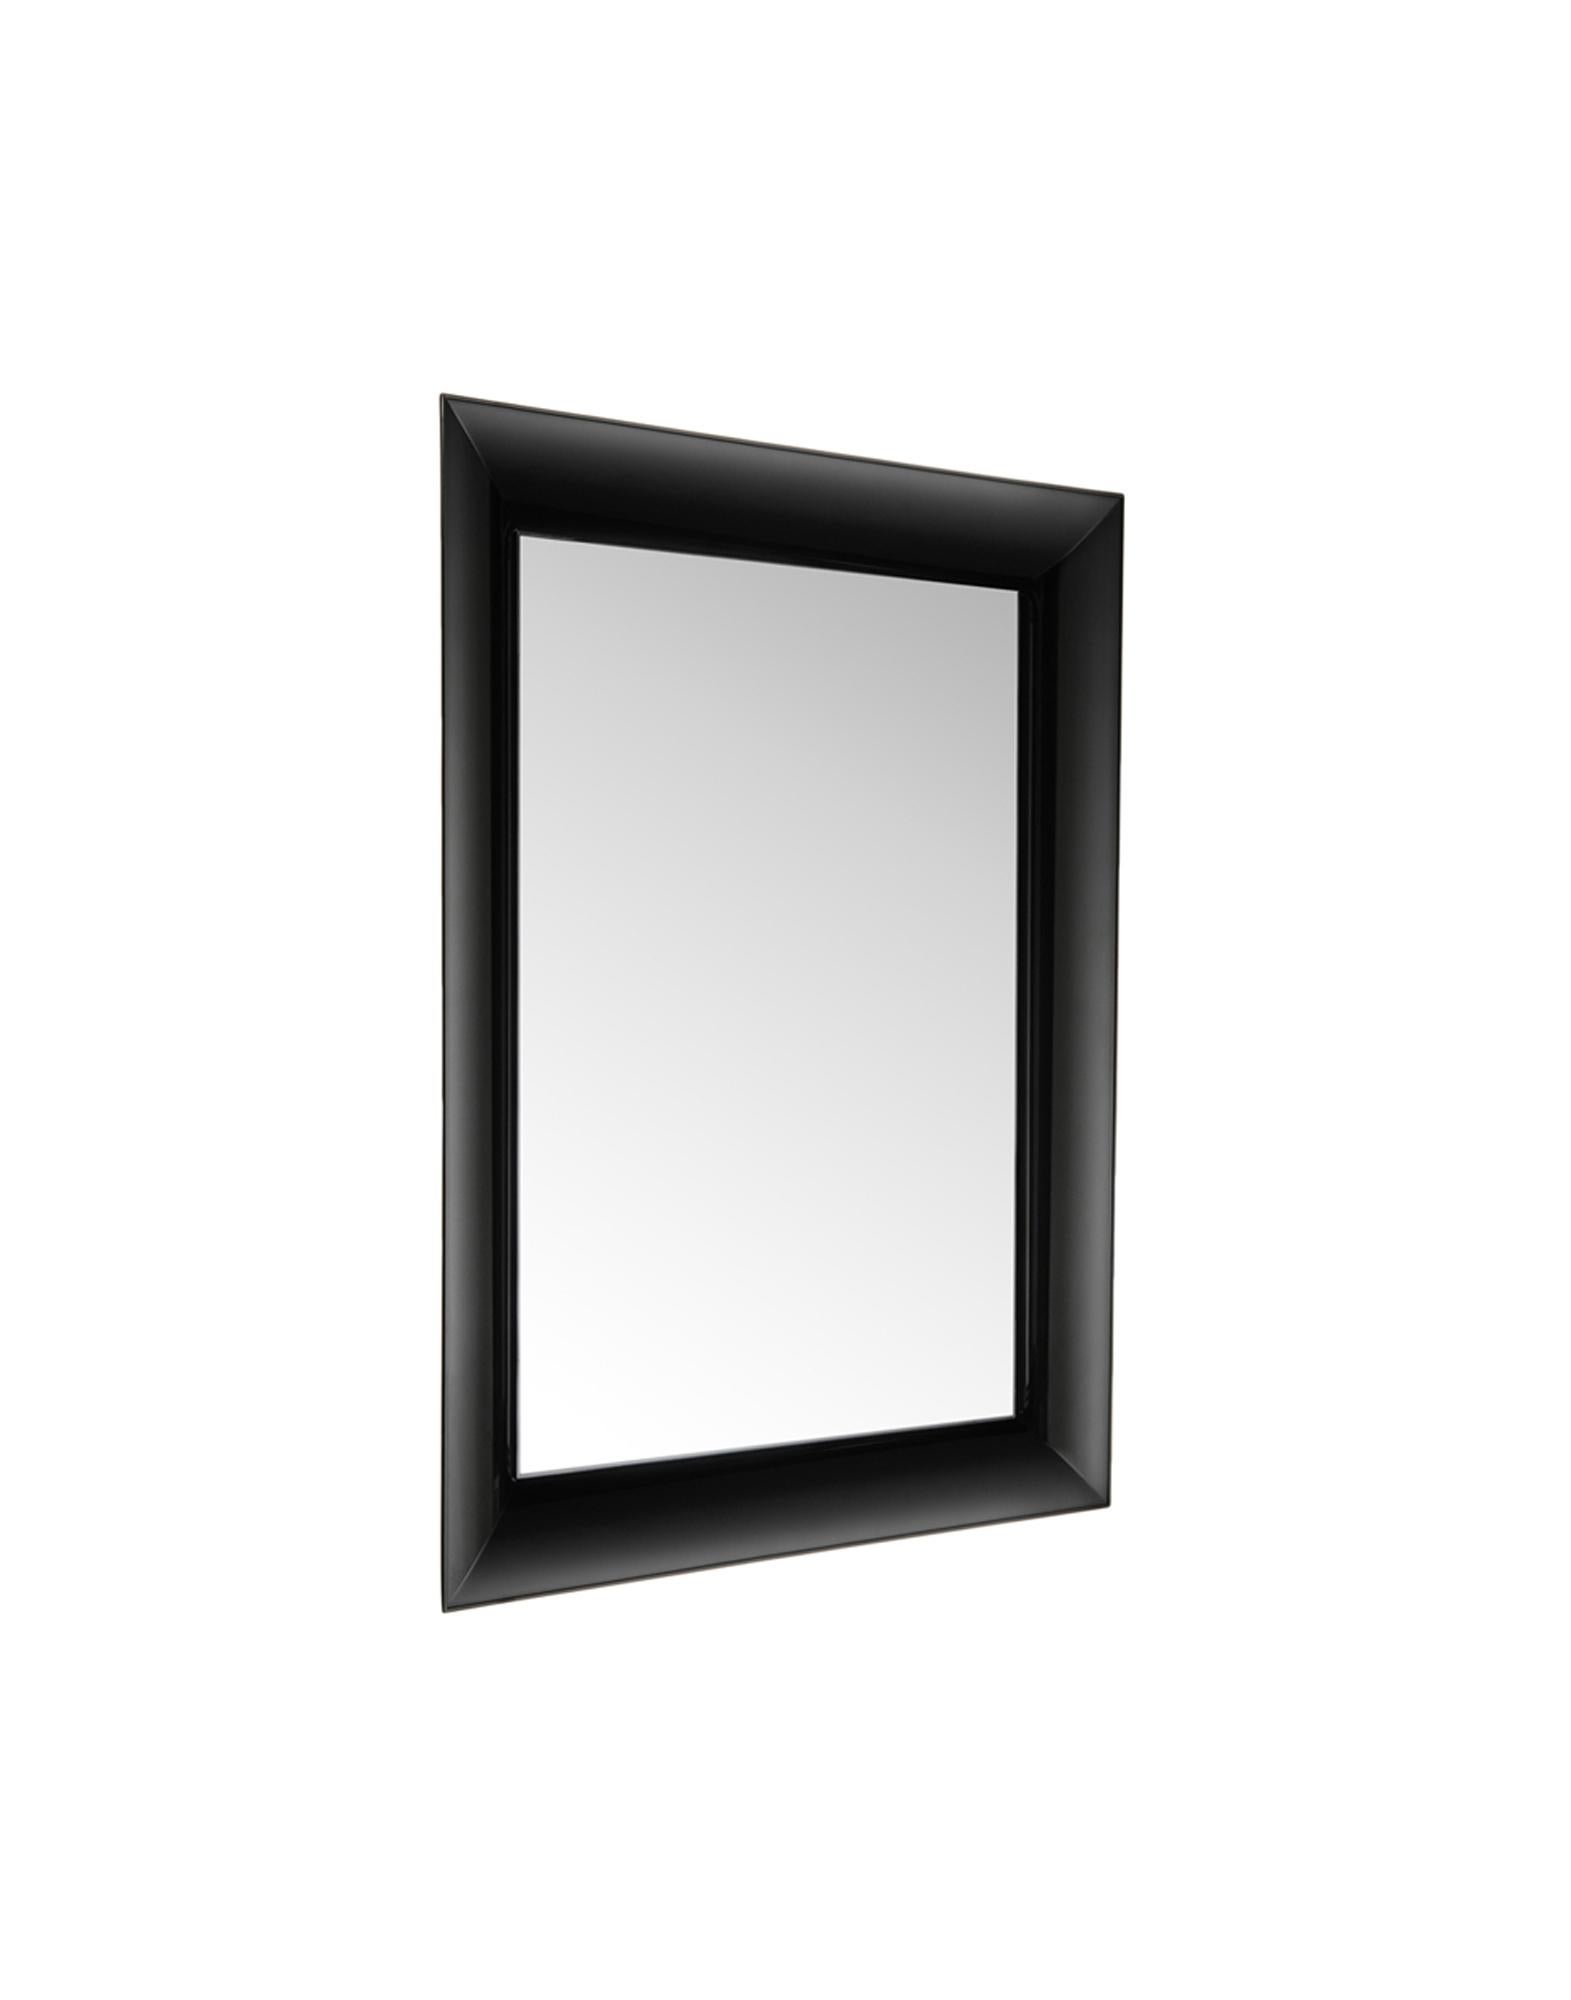 A series of rectangular two-dimensional wall mirrors which bring to mind milled crystal frames. The frames are made of transparent or colored polycarbonate with seagull wing sections and can be hung horizontally or vertically. Designed for